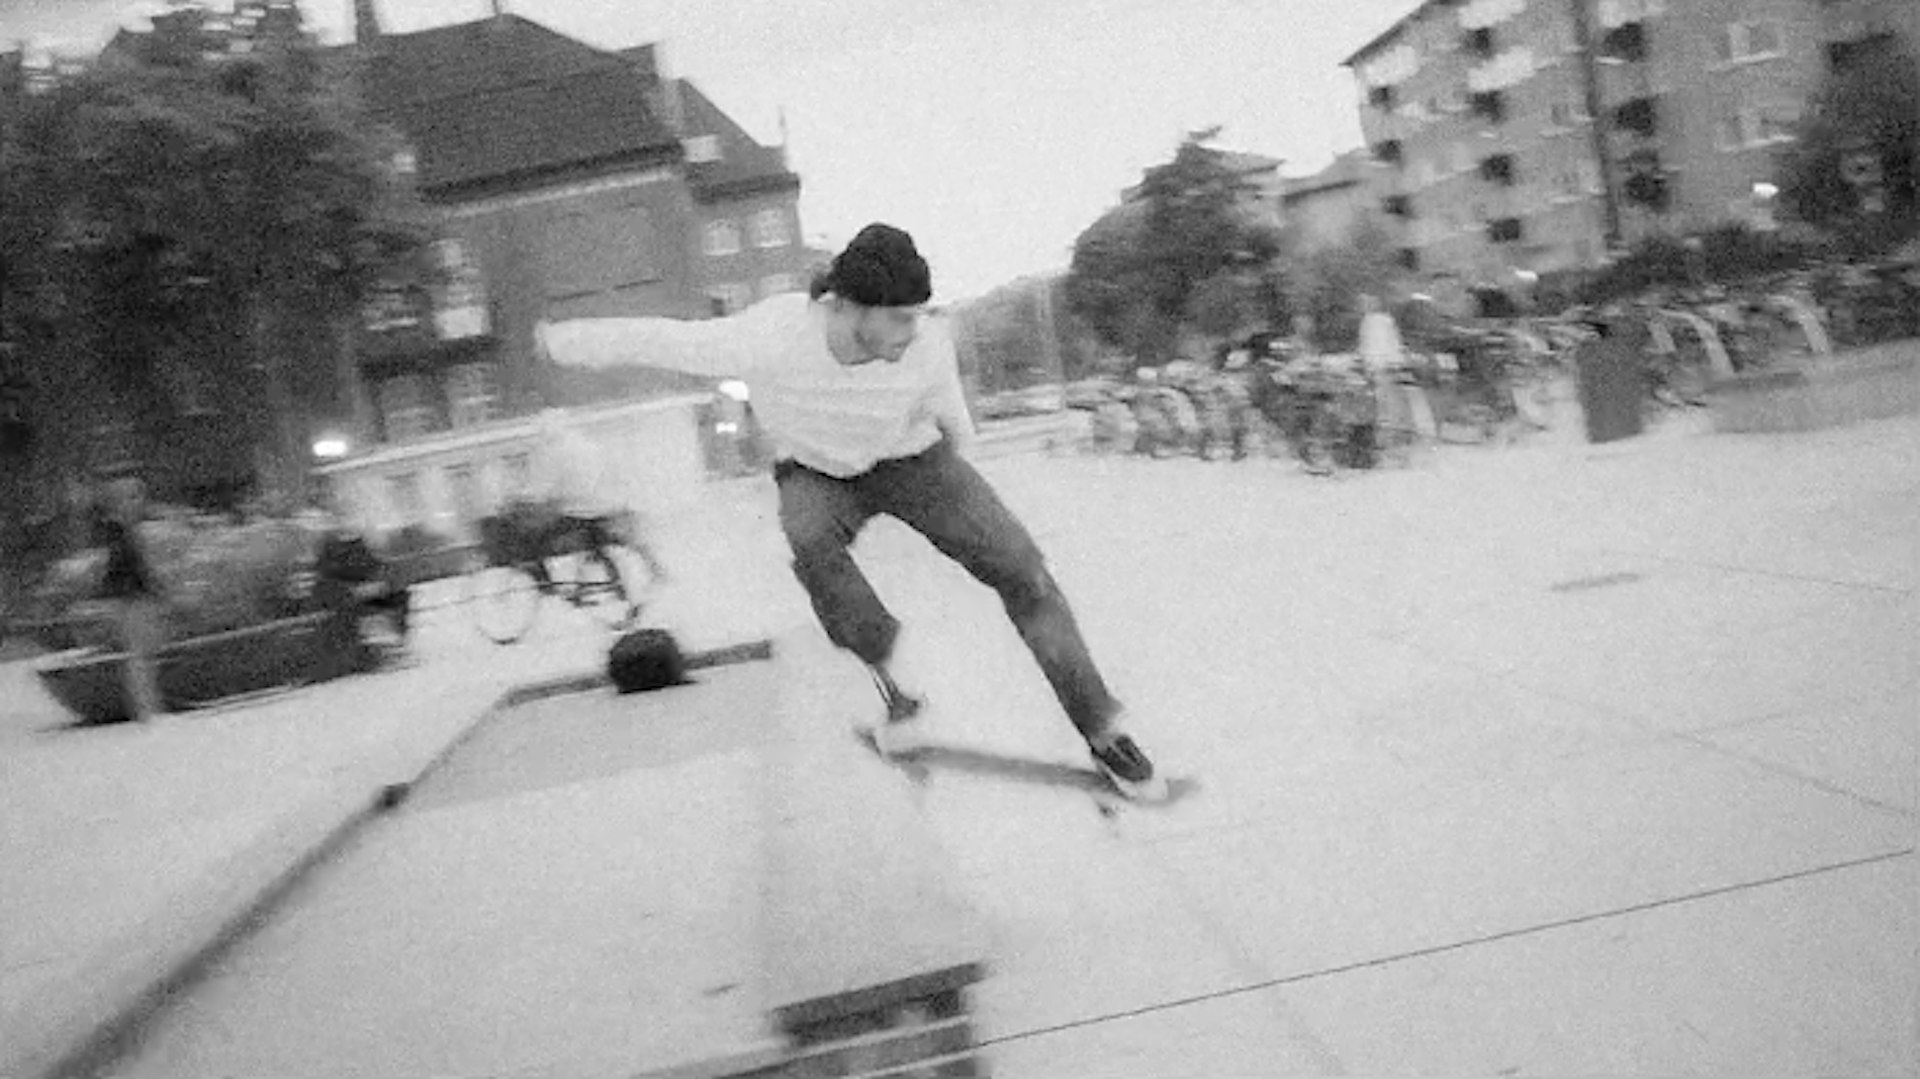 Swedish skate video showcases all the best analogue photo formats